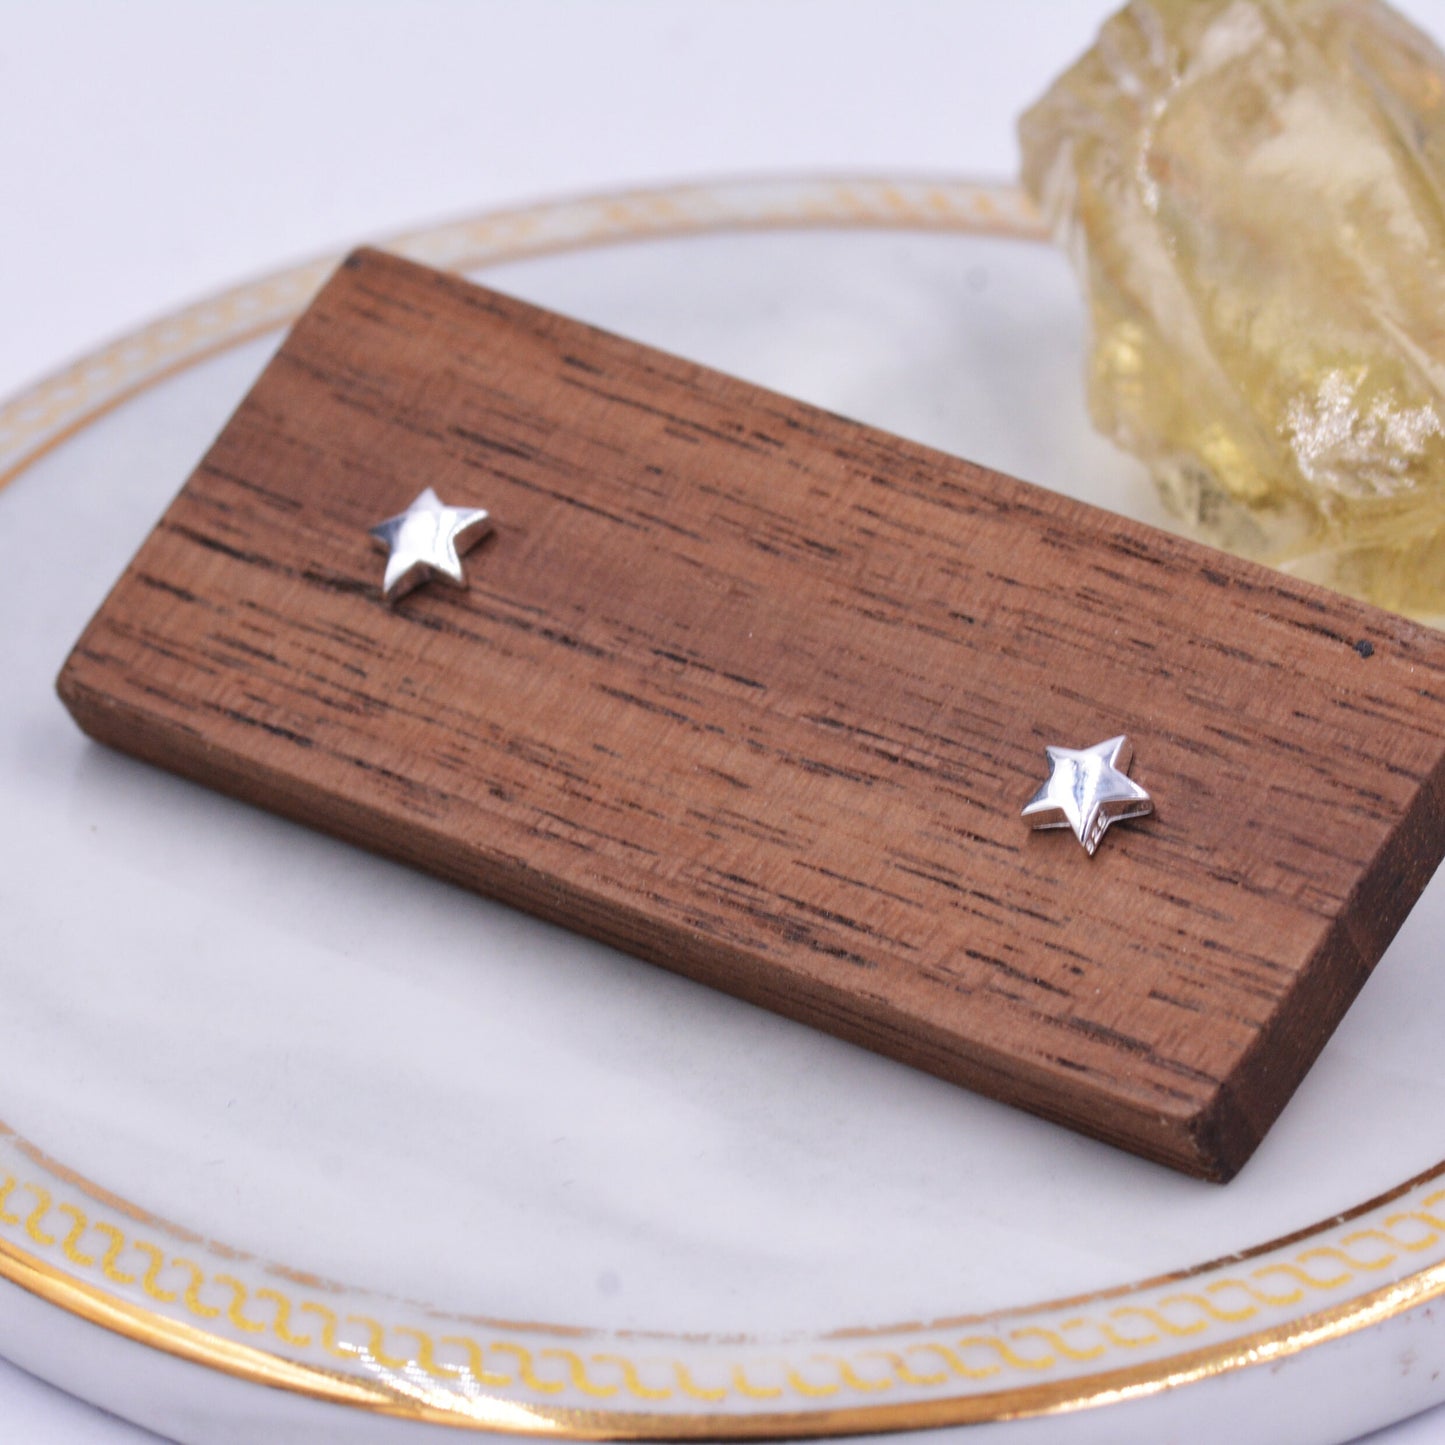 Sterling Silver Very Tiny Little Star Stud Earrings, Barely Visible, Minimalist, Geometric, Cute and Fun Jewellery D84